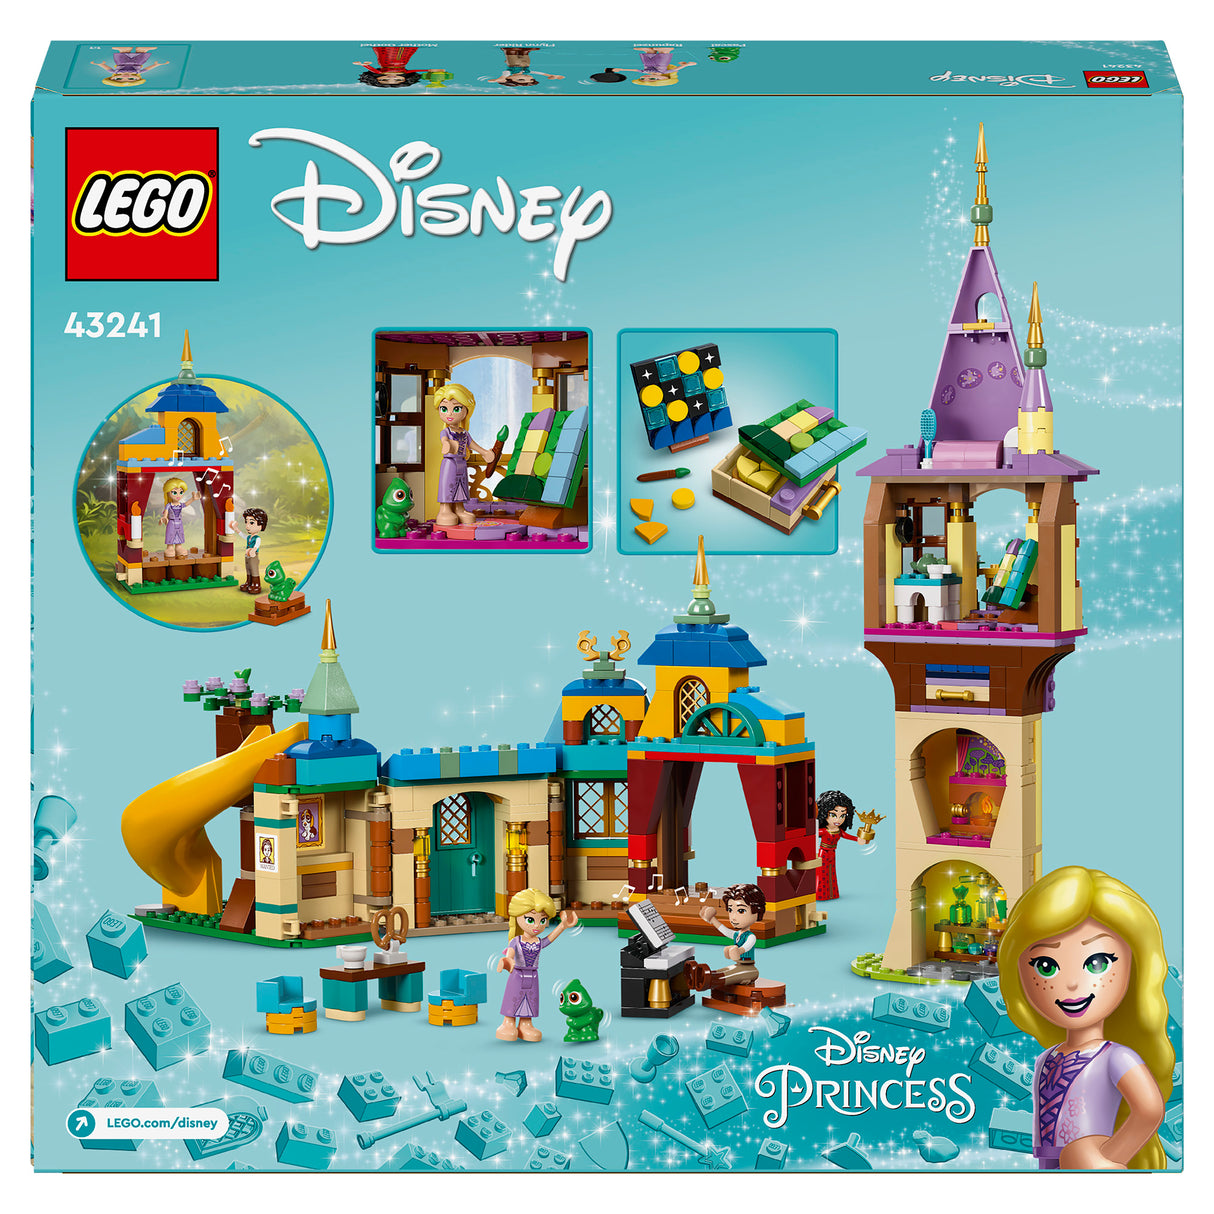 LEGO Disney Princess Rapunzel's Tower & The Snuggly Duckling 43241, (623-pieces)